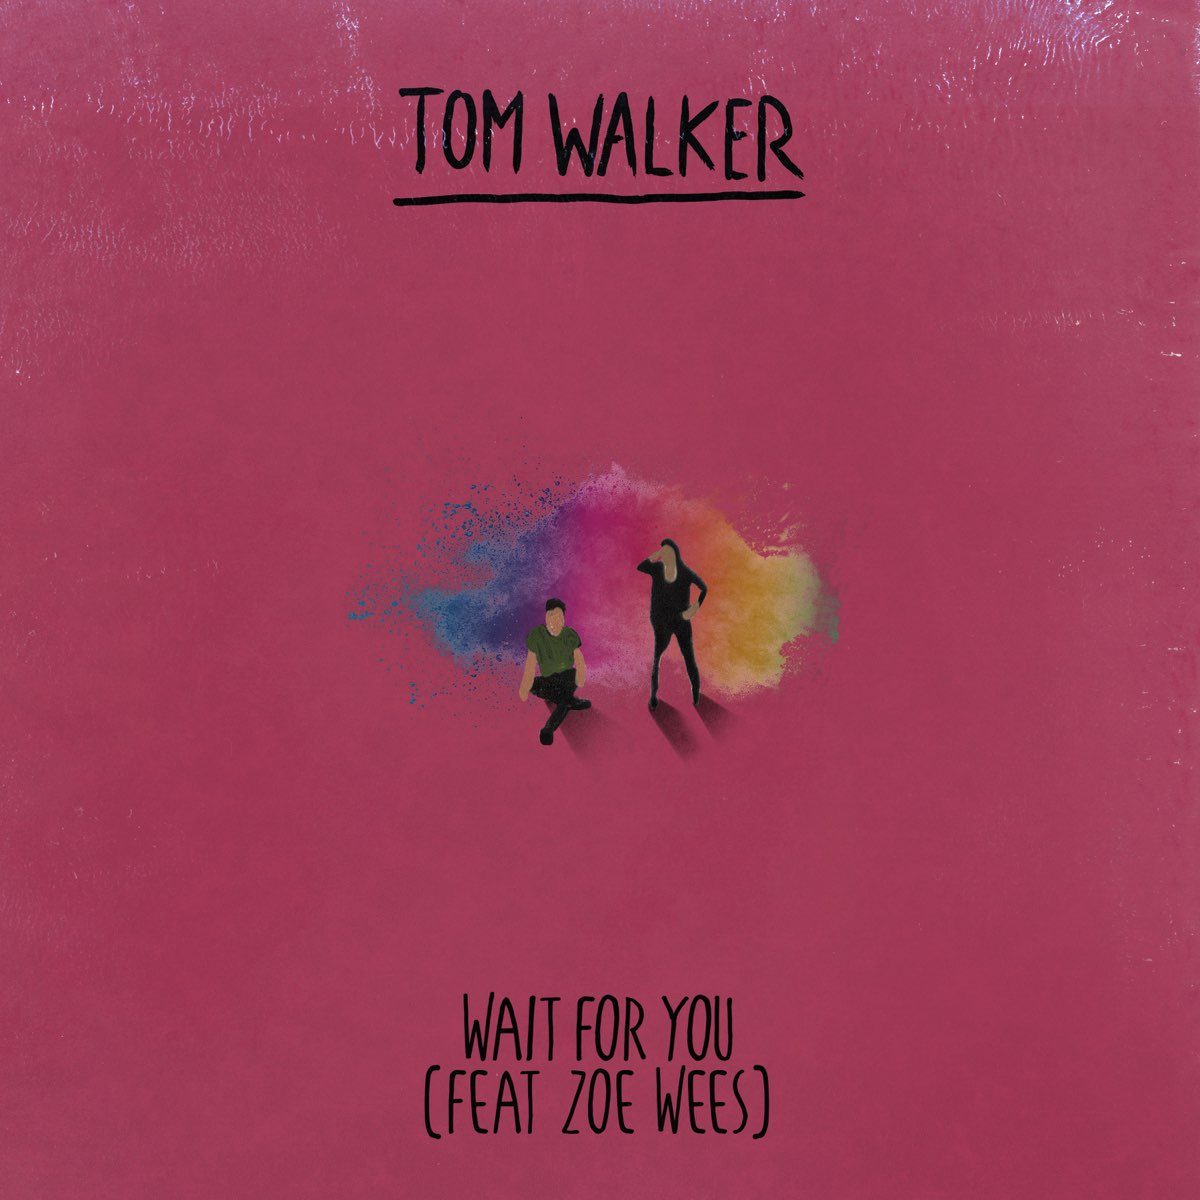 Wait for You - Single by Tom Walker & Zoe Wees on Apple Music